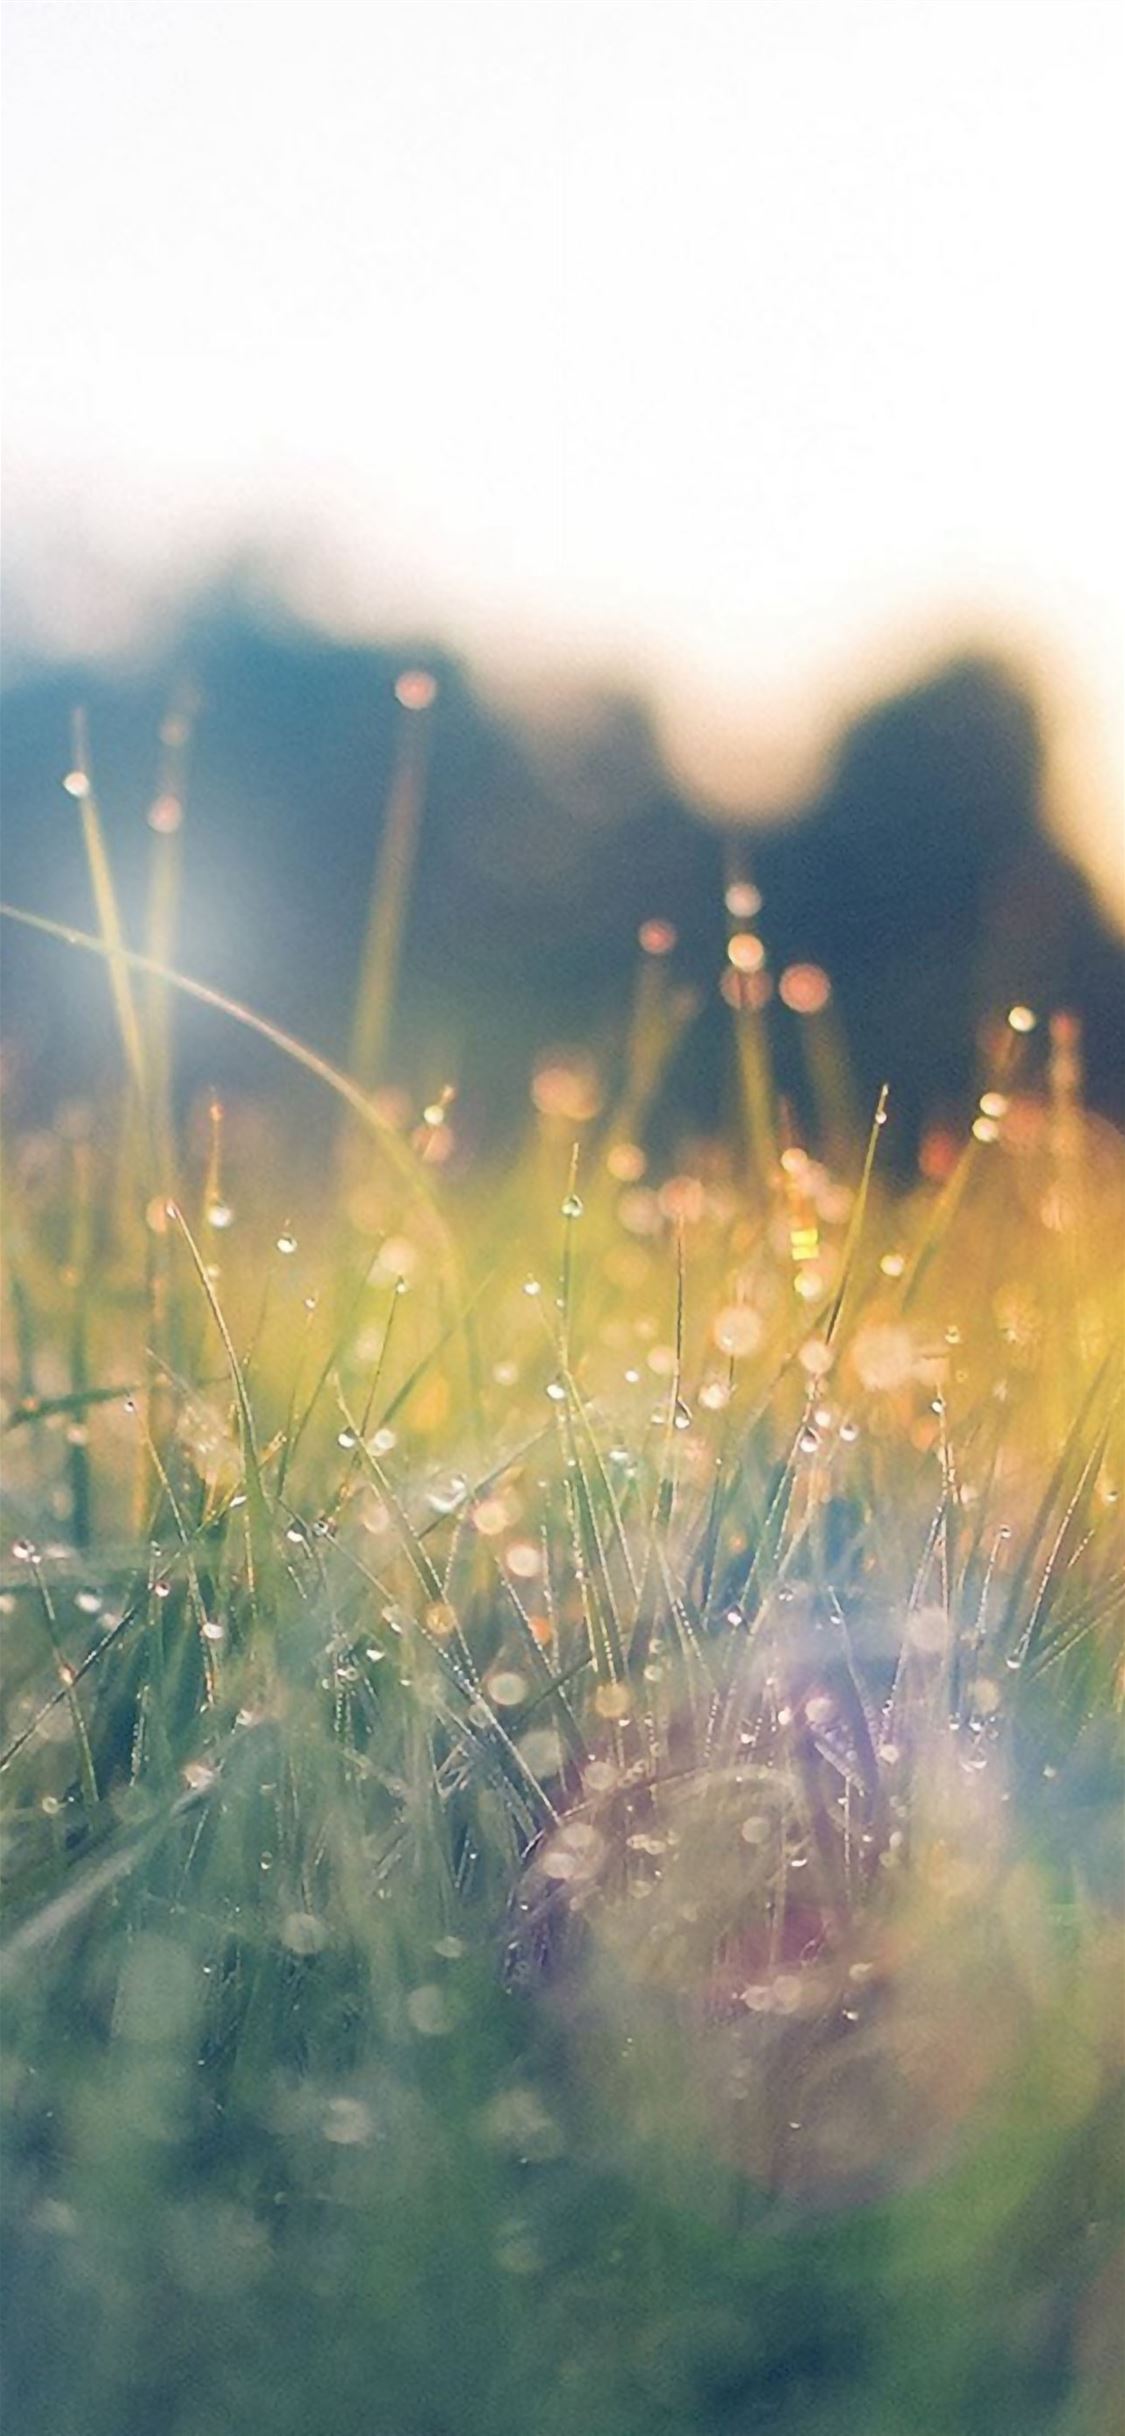 Lawn Green Nature Sunset Light Bokeh Spring Flare Happy iPhone wallpaper 